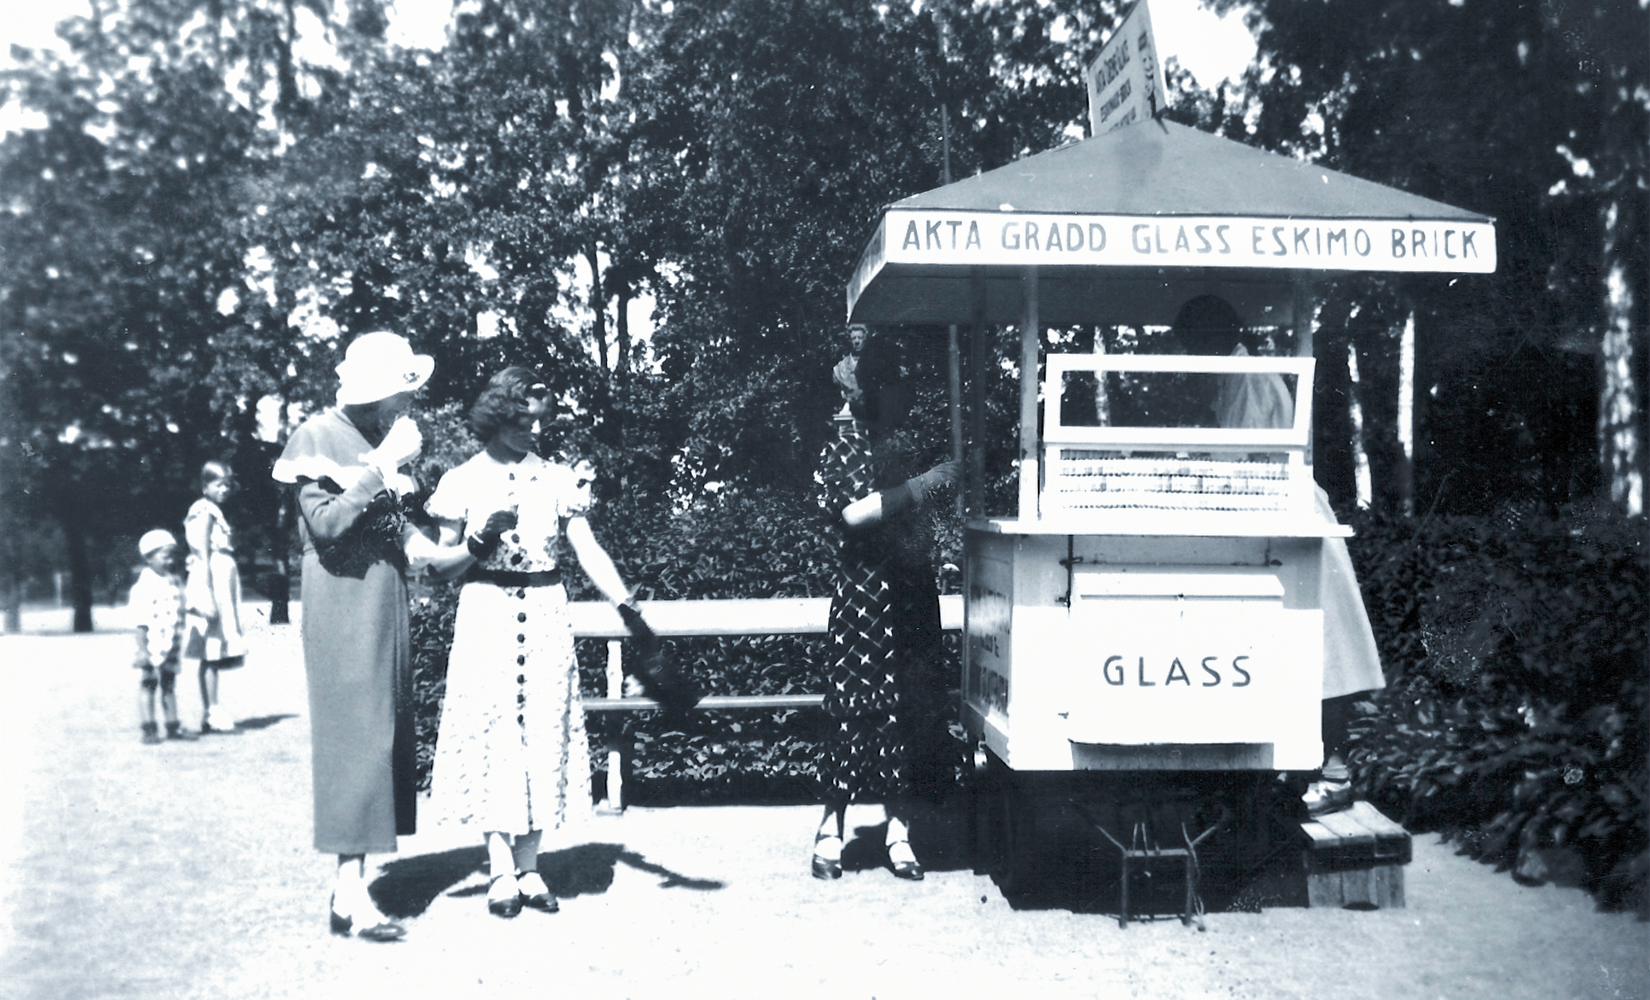 Two women in early 20th century dresses having ice cream in black and white picture